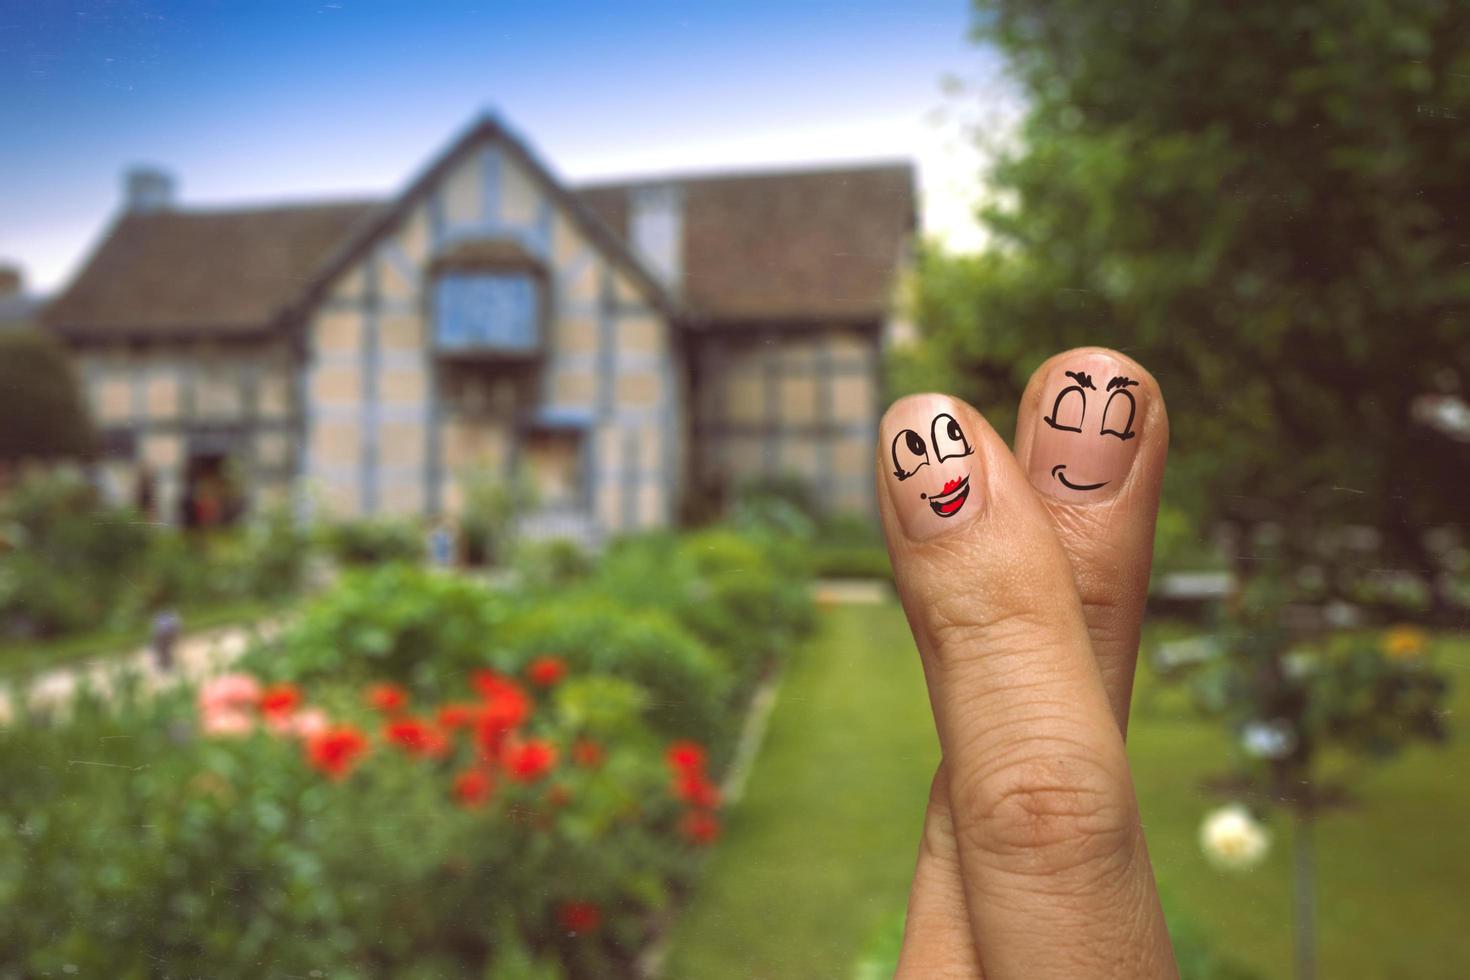 the happy finger couple in love with painted smiley on london house blurred background photo